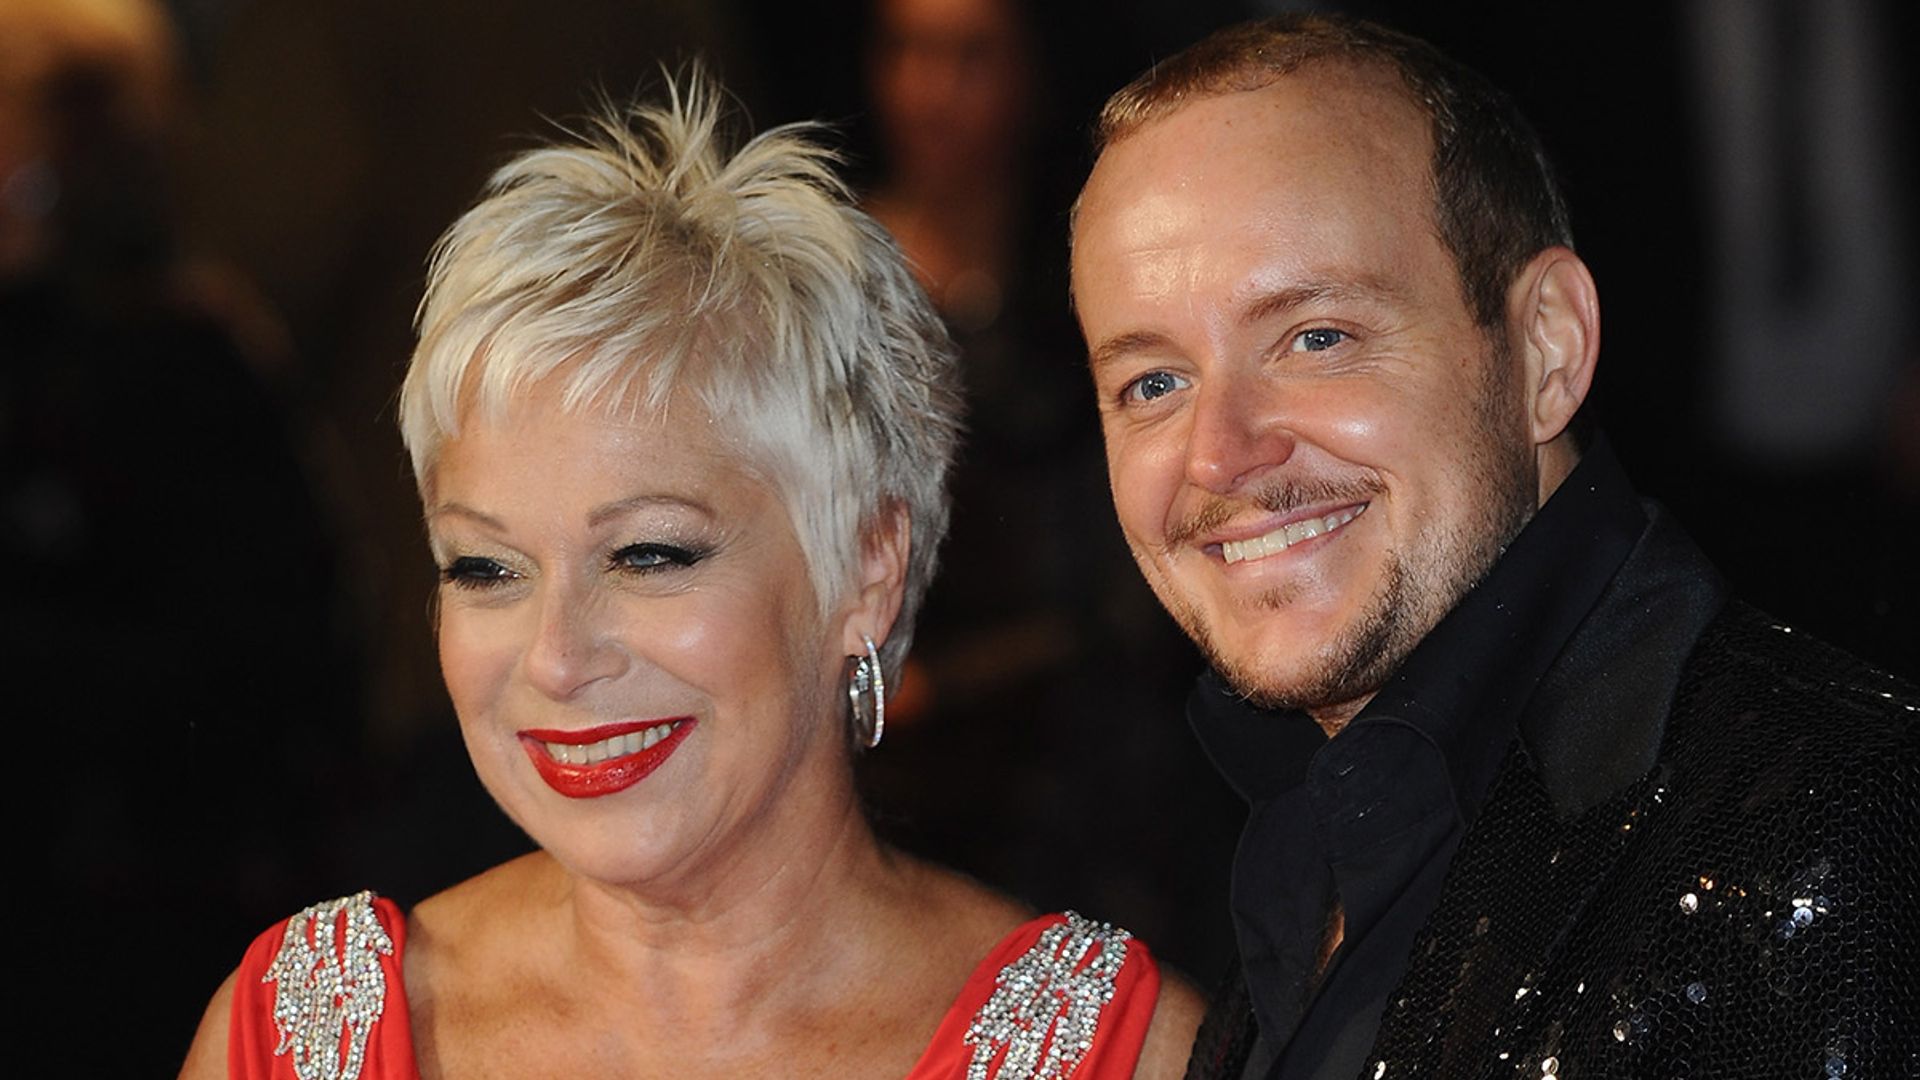 denise welch lincoln townley